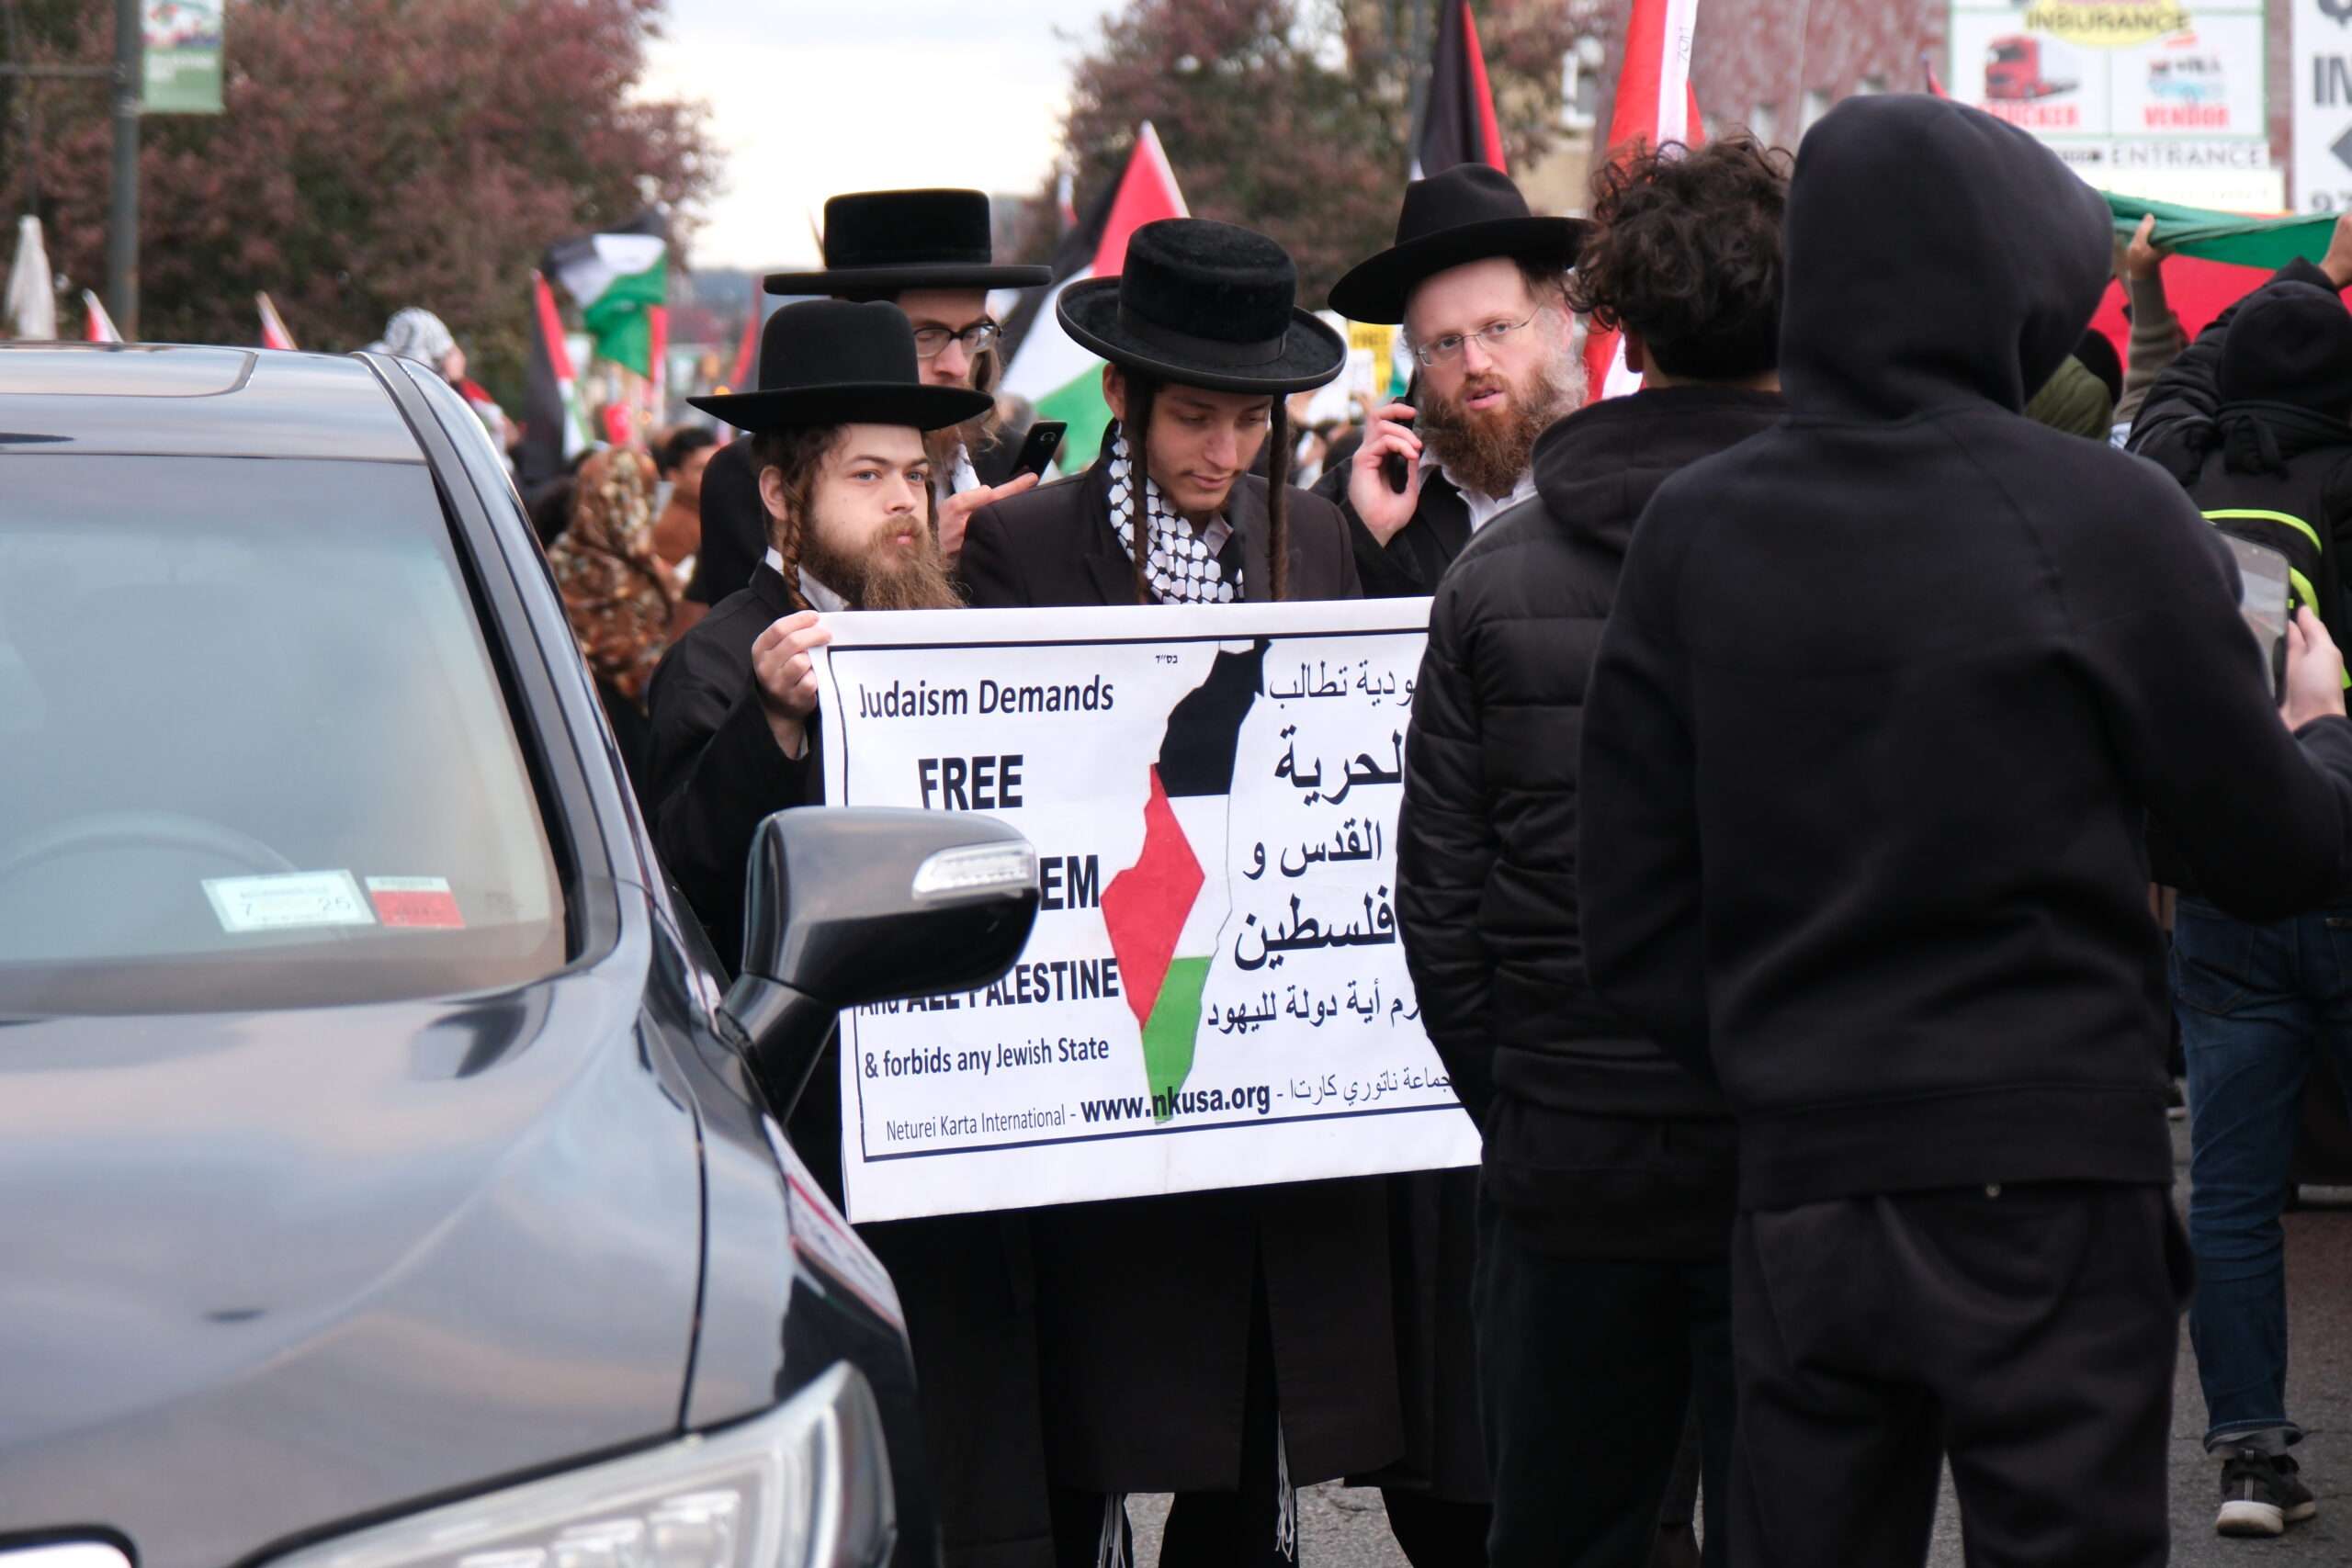 Members of the fundamentalist Jewish group known as Neturei Karta marched at the front of the protest. | Photo: Matthew Petti